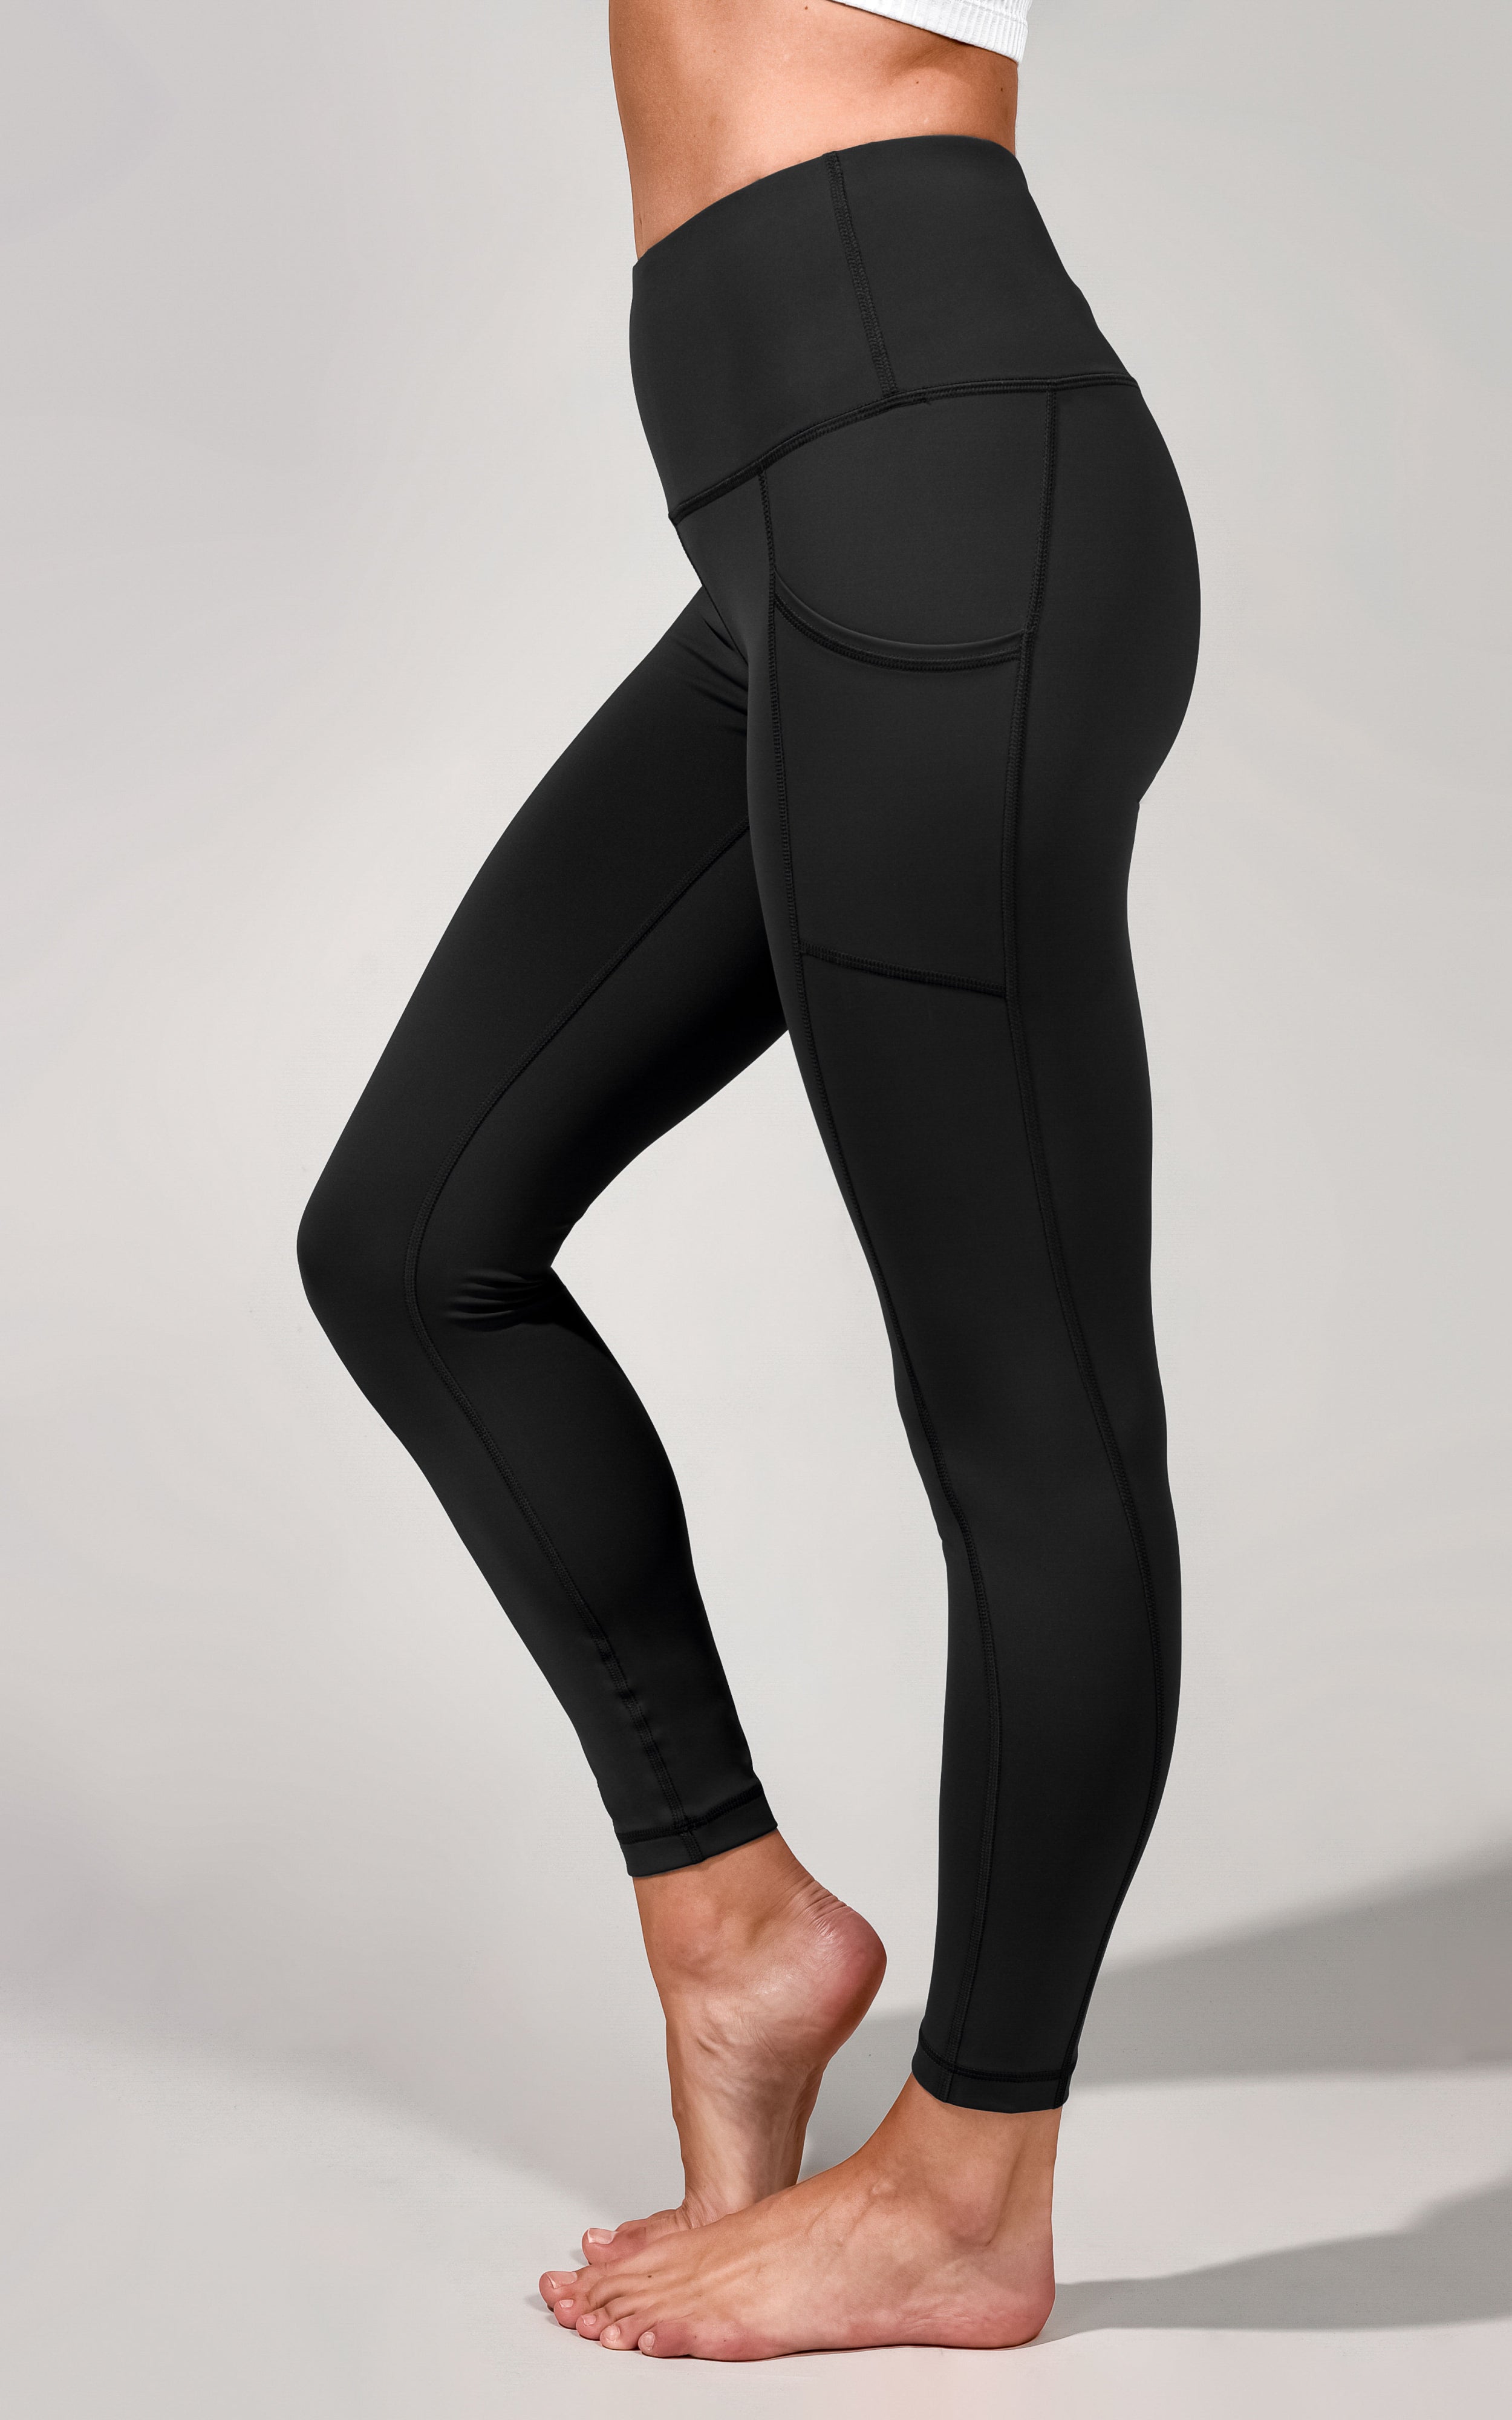 Squat Proof High Waist Fitness Sport Leggings Women Joggers Sweatsuit -  China Girls Elastic Jogger and Sweatsuit price | Made-in-China.com